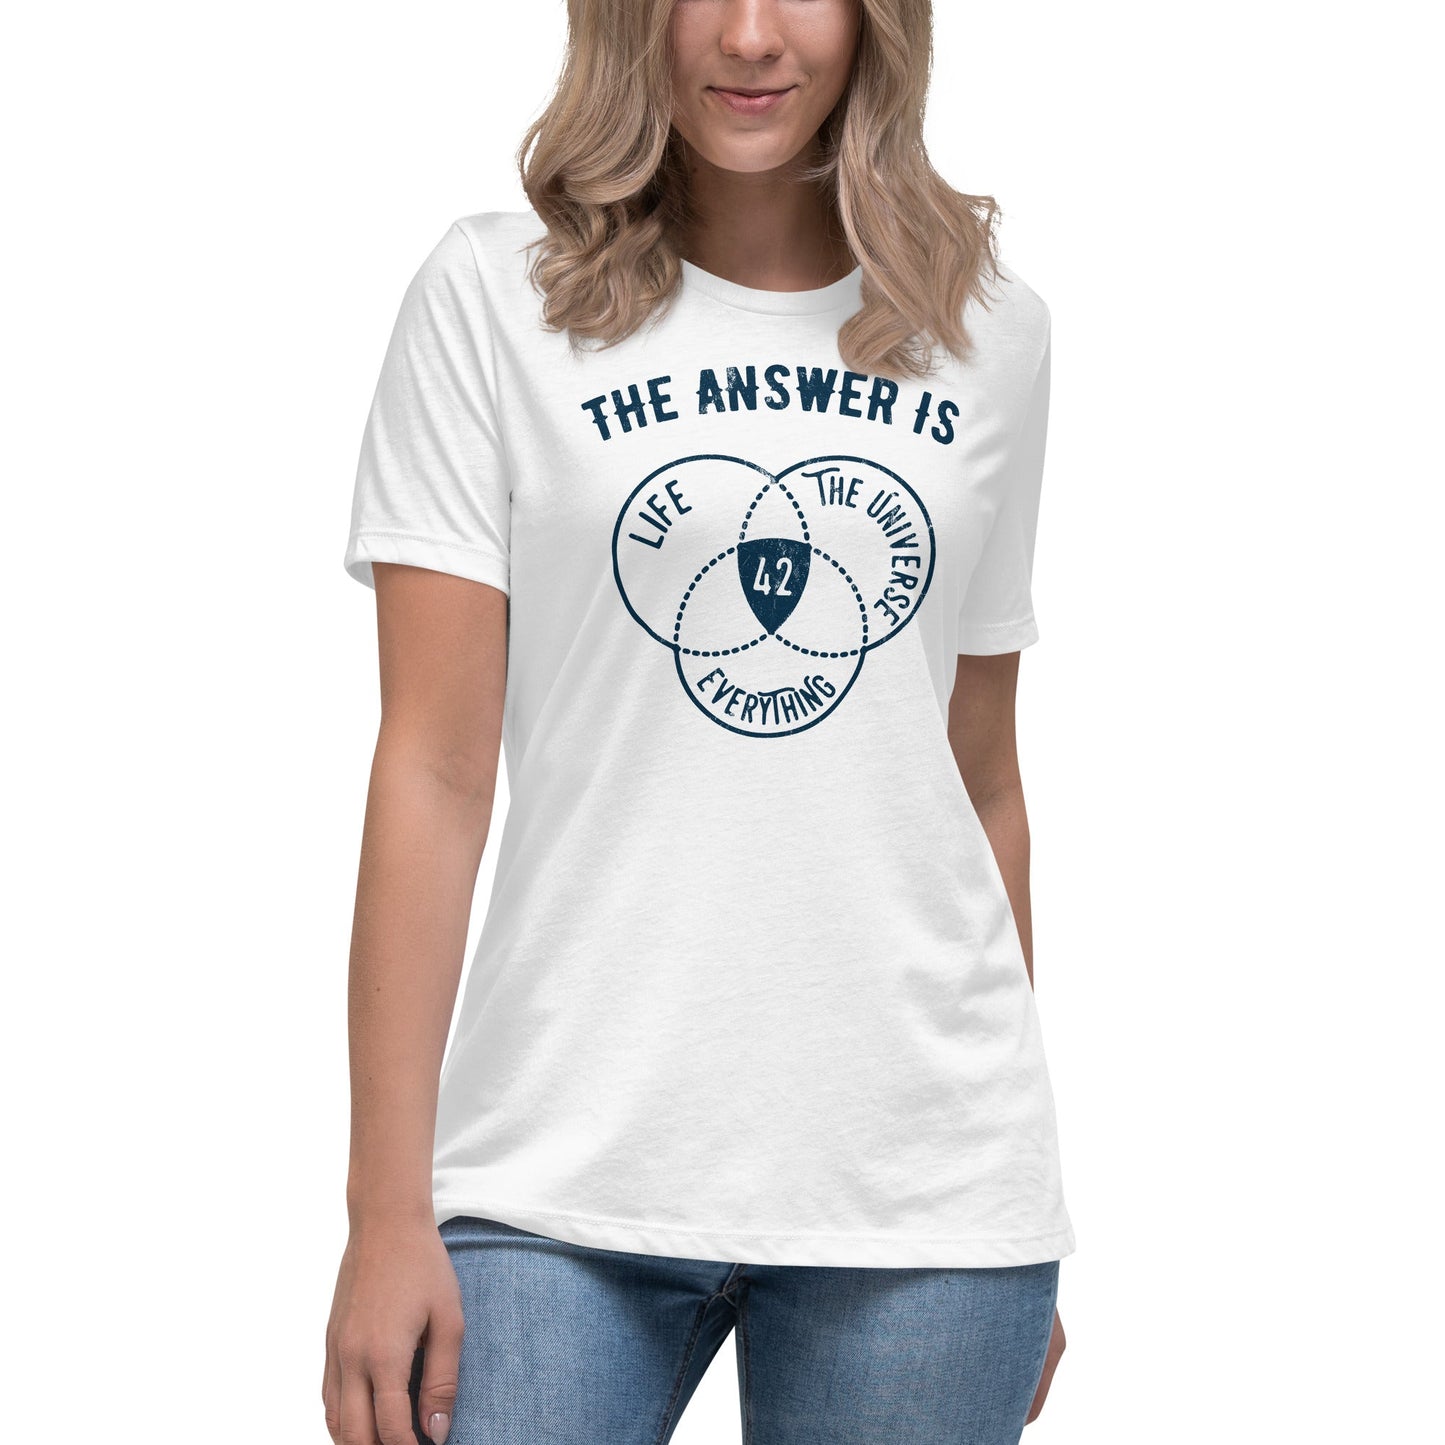 The Answer Is Always 42 - Women's T-Shirt